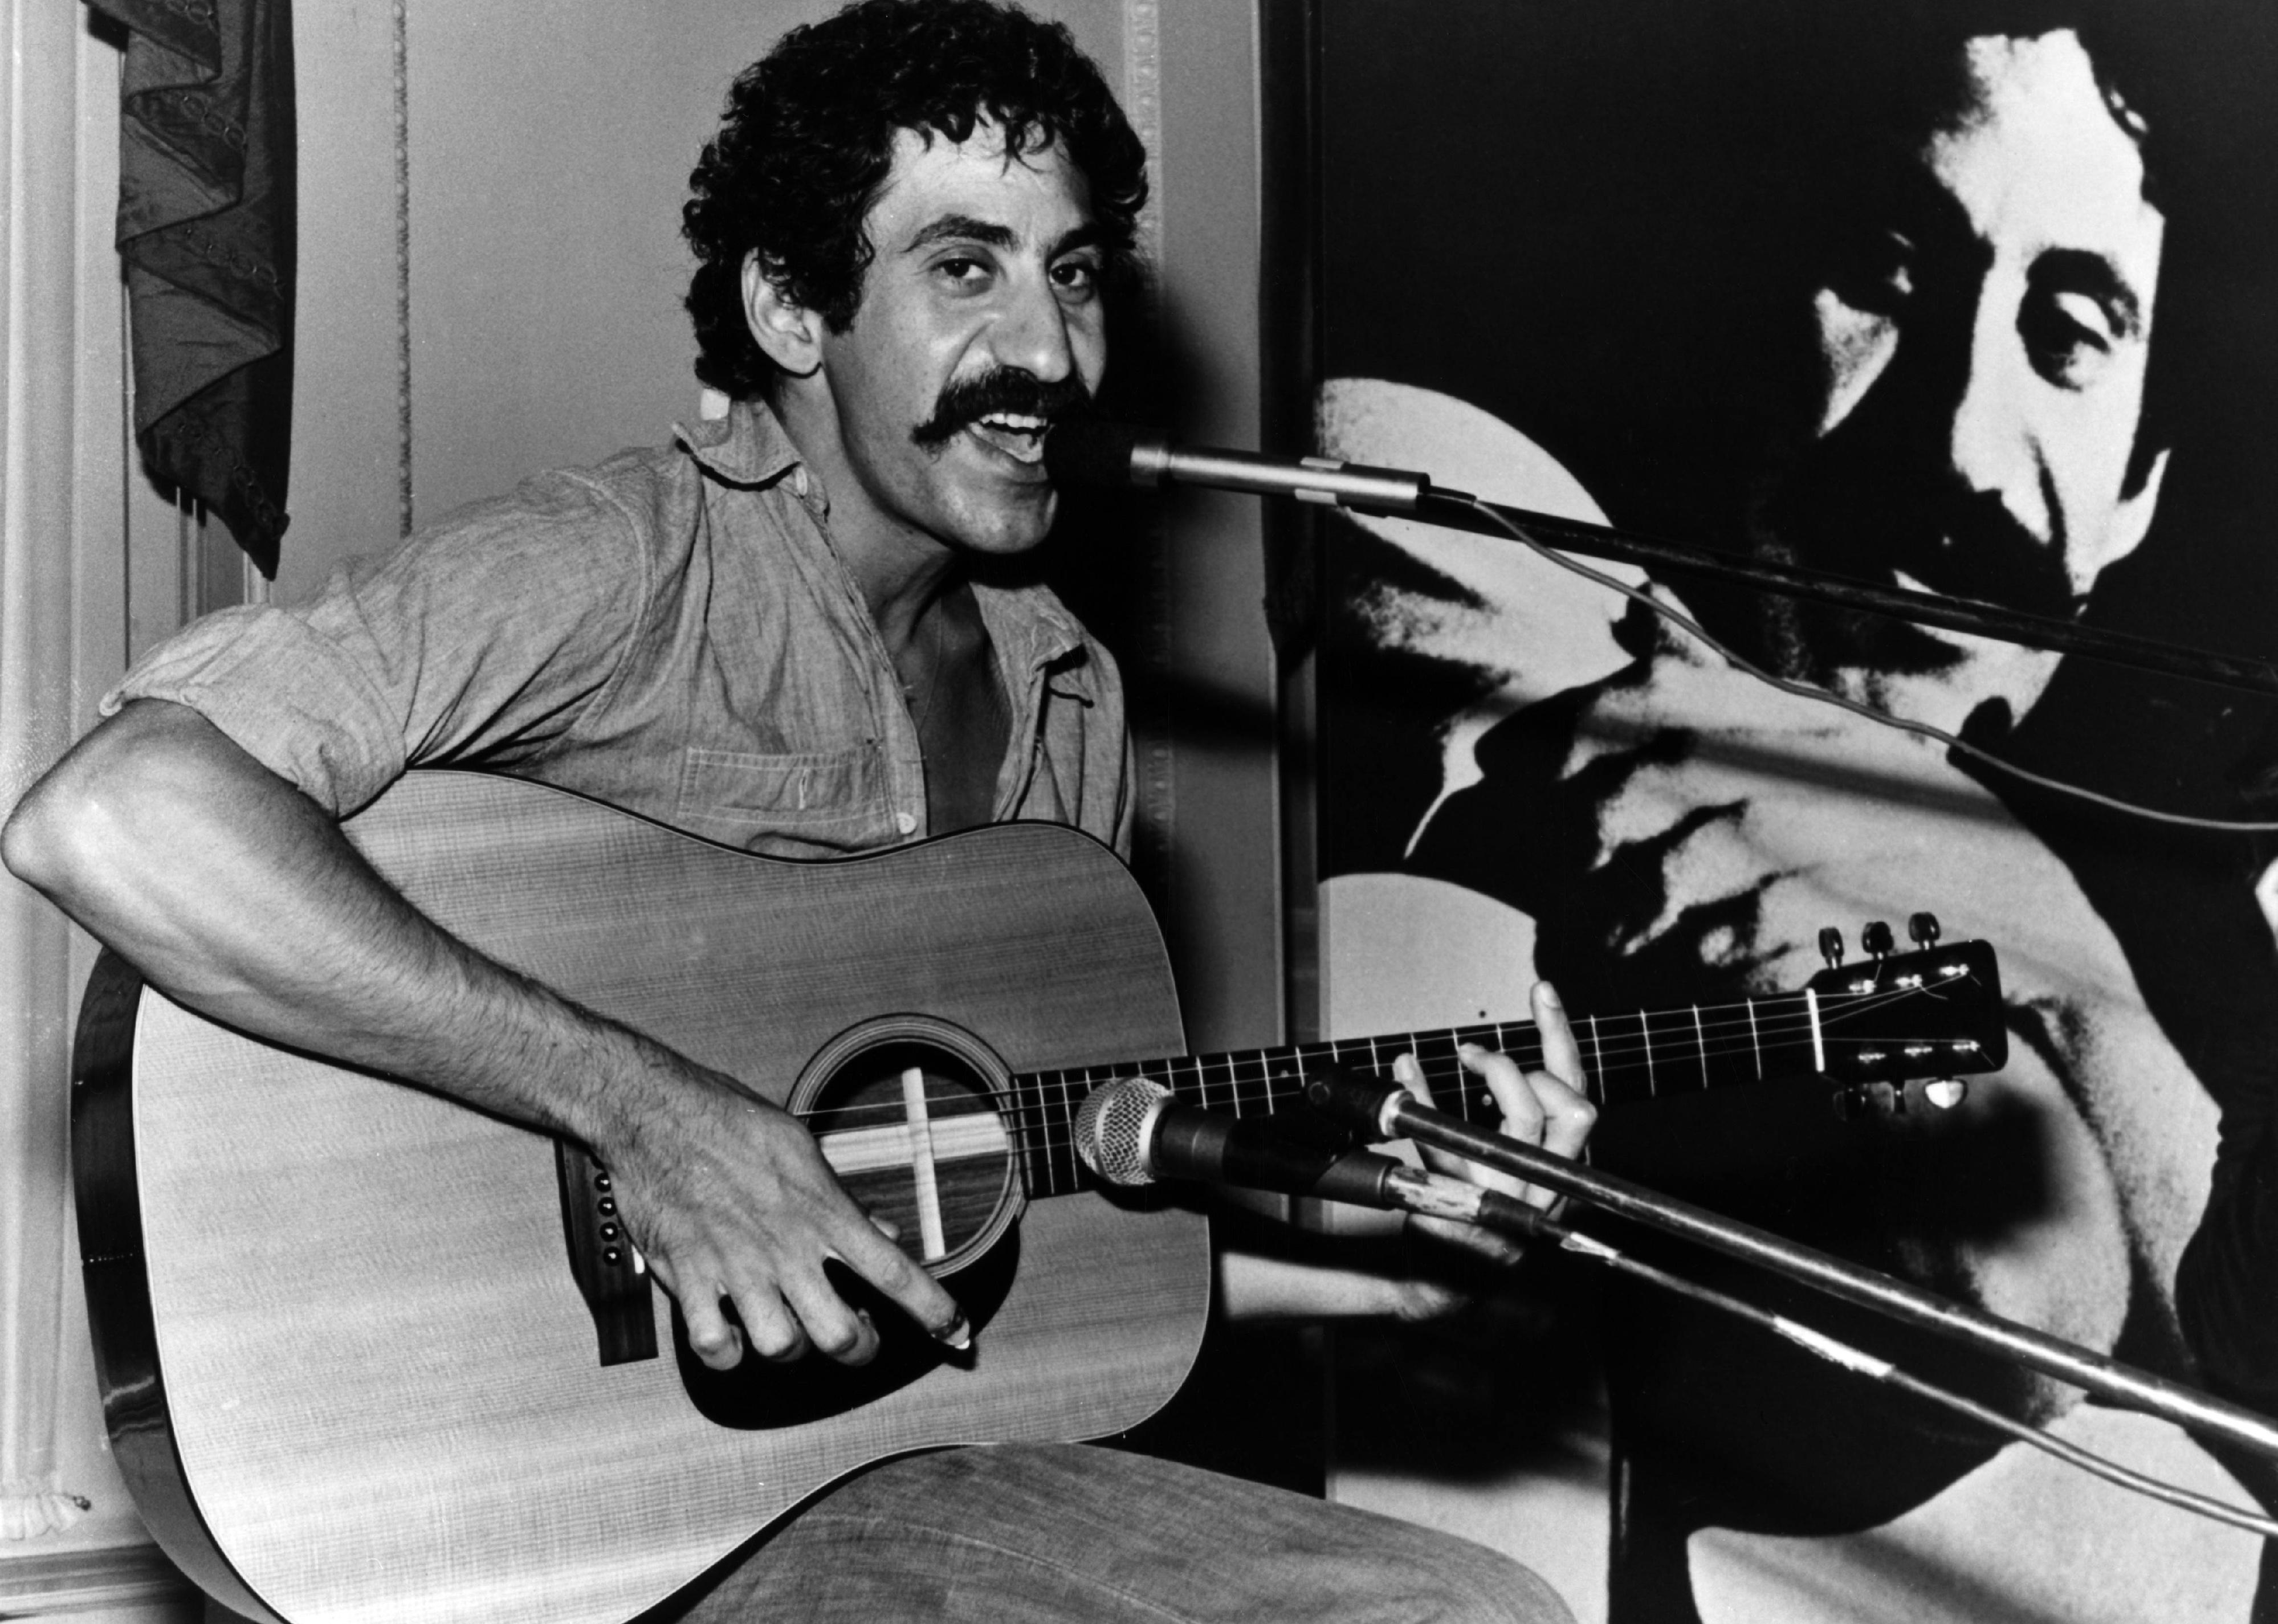 Jim Croce sitting with guitar and mic.